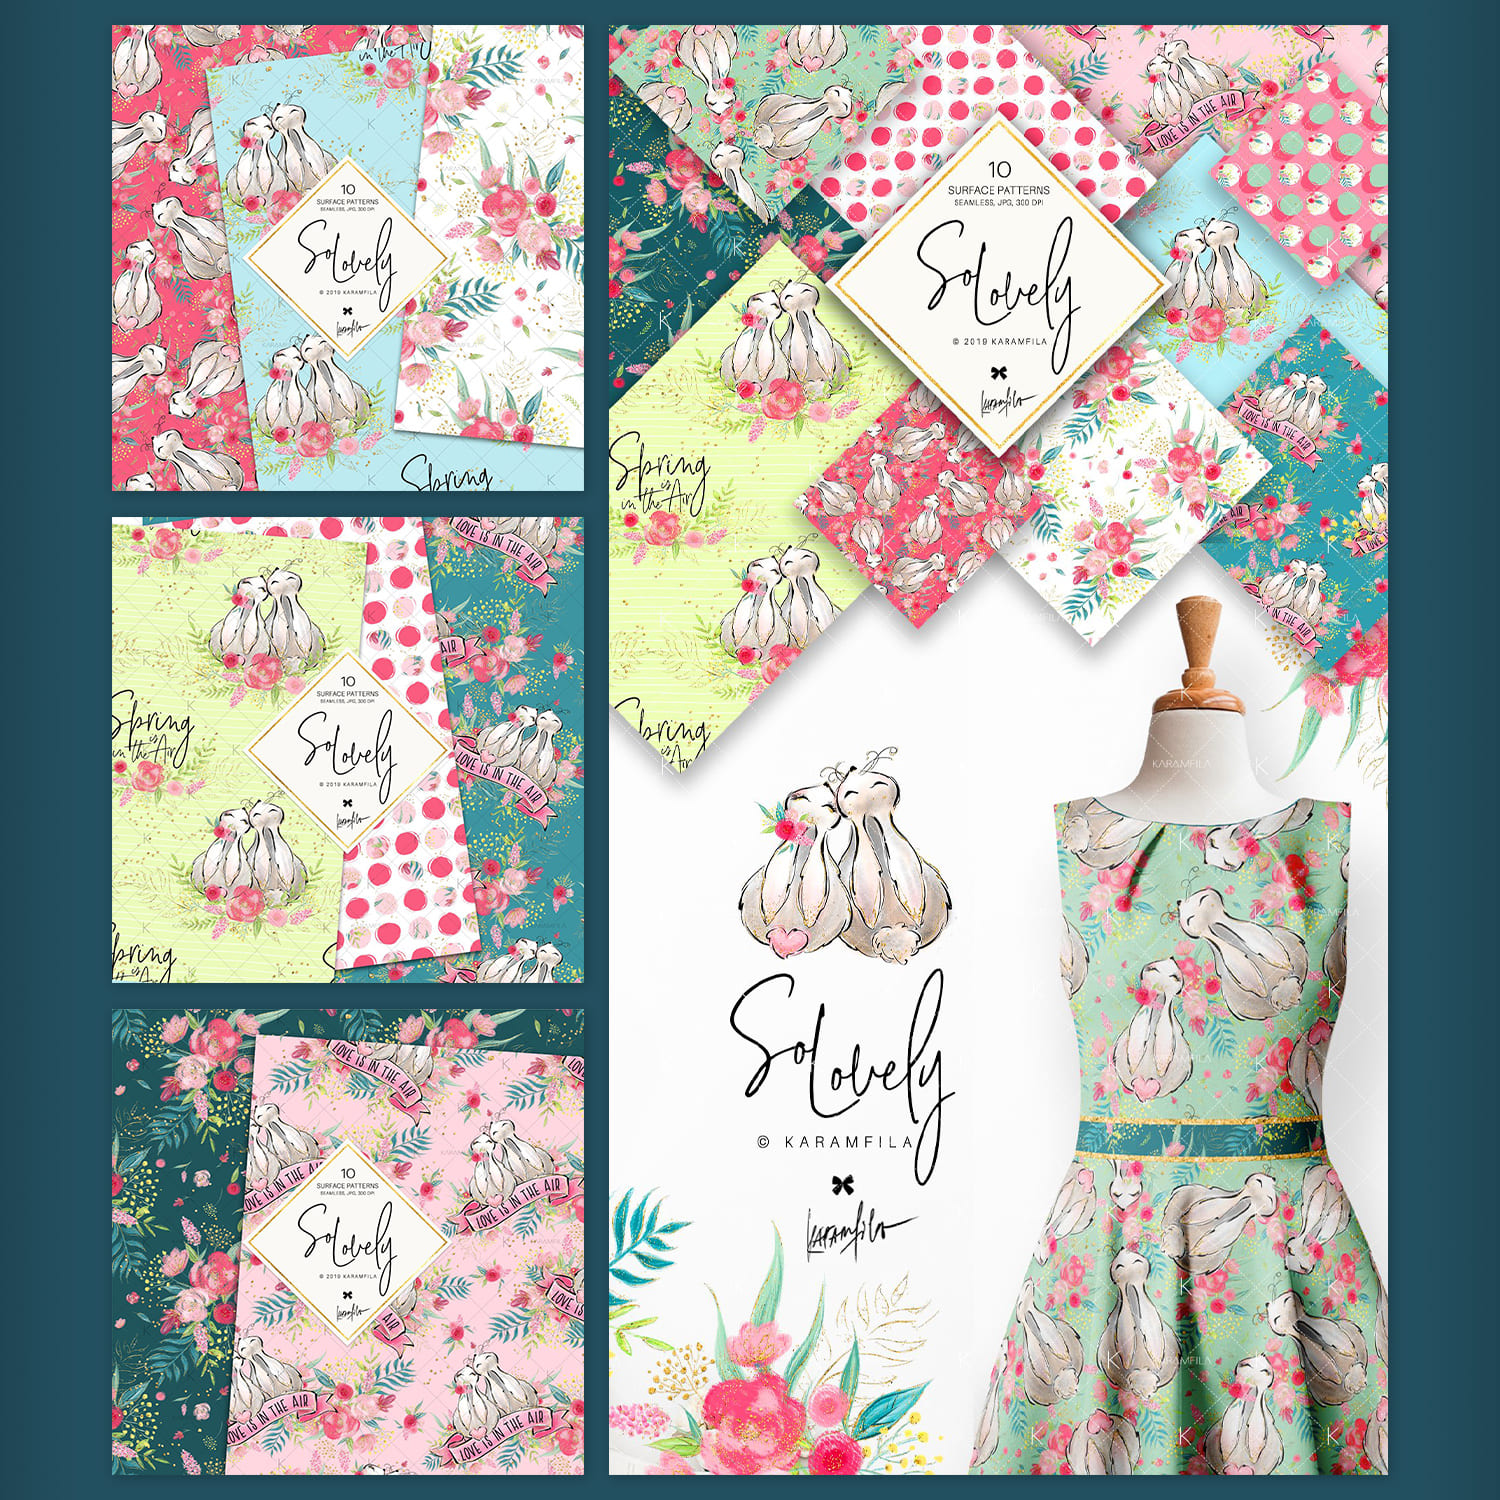 Spring Bunny Patterns cover.